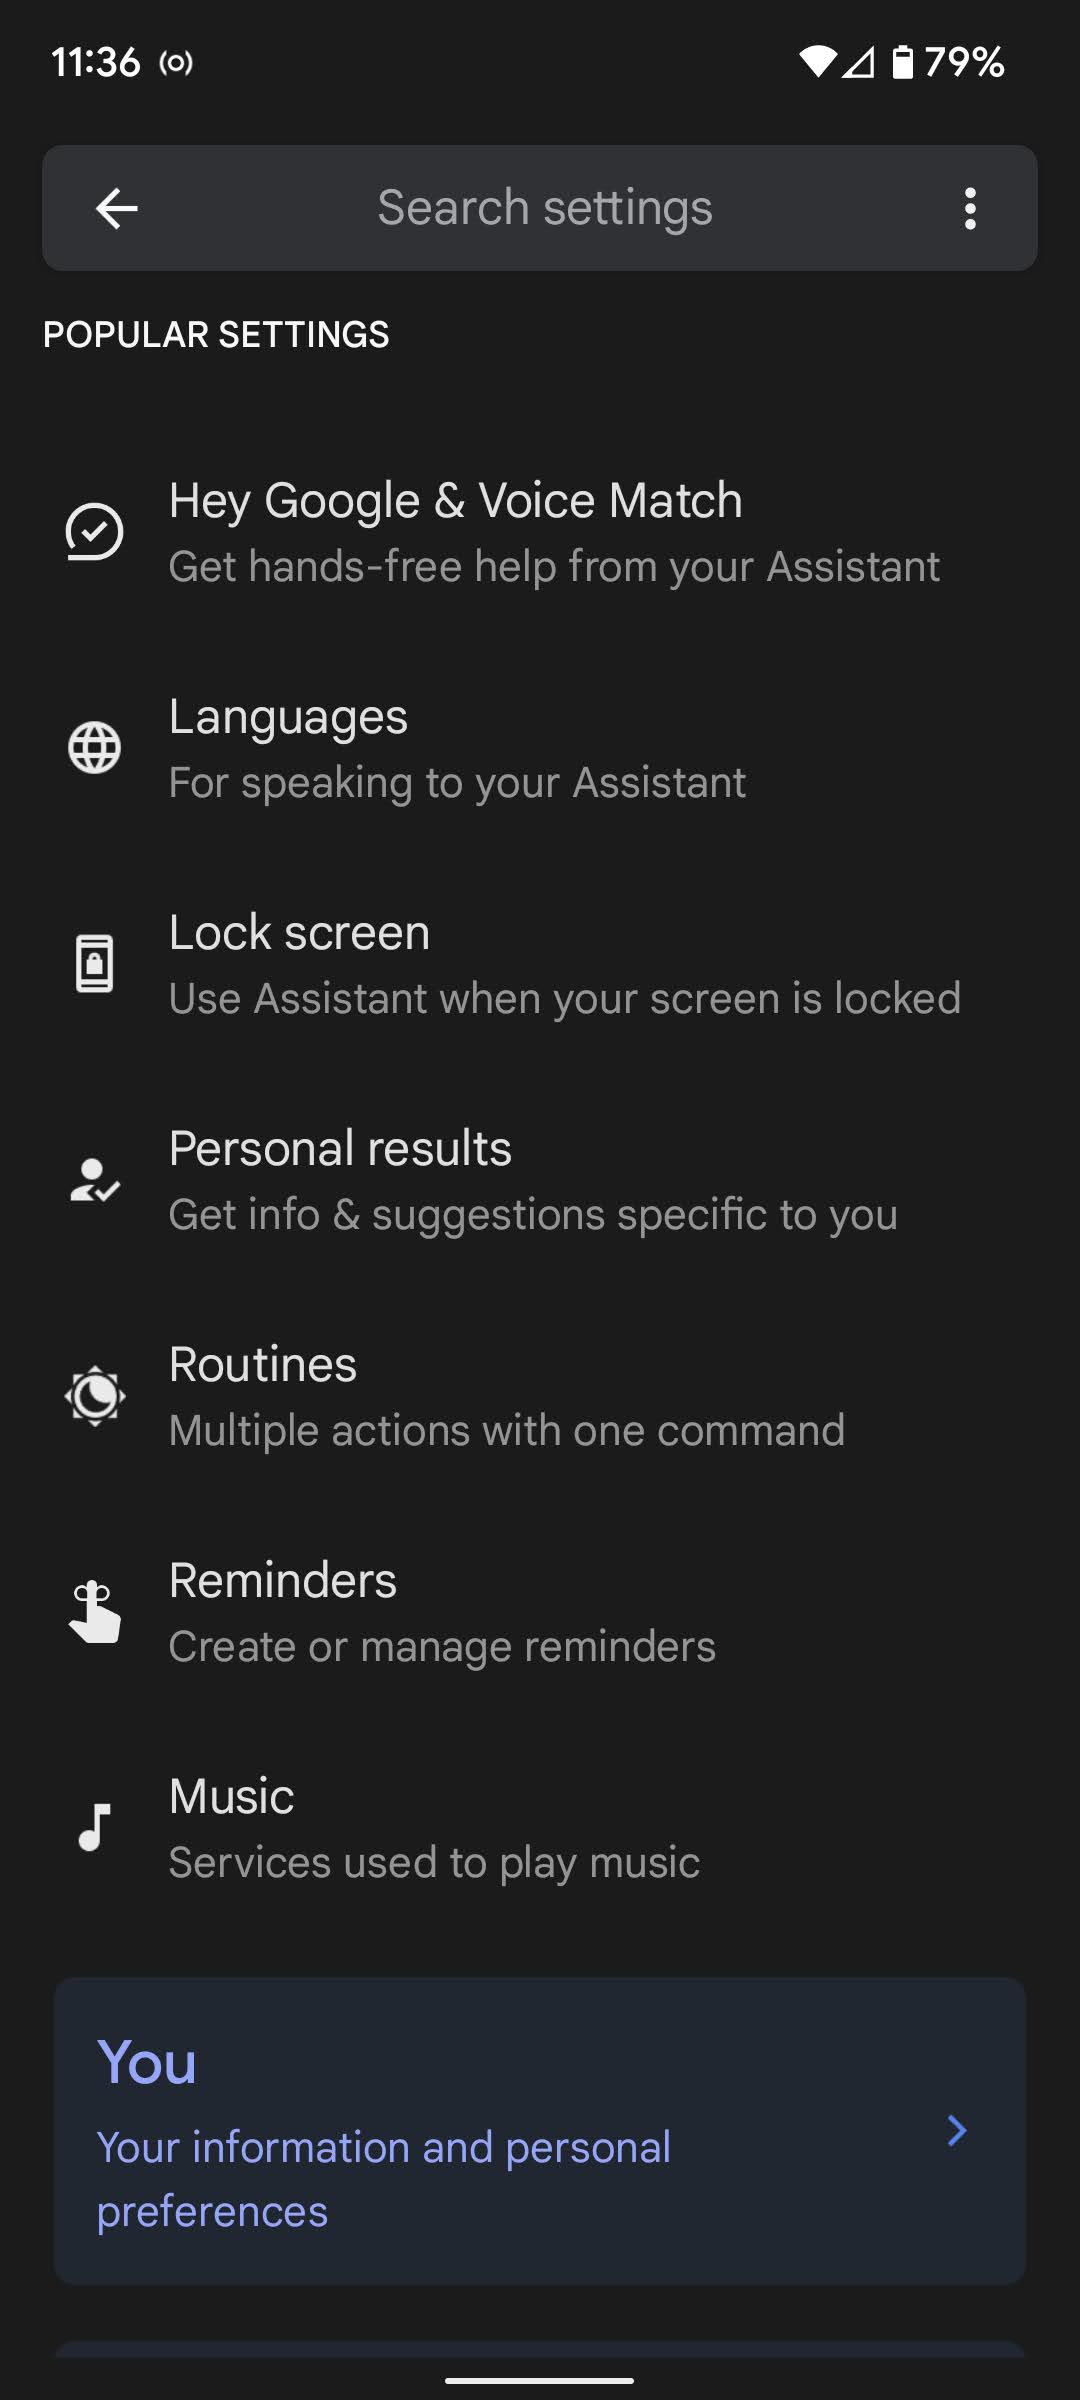 This time, select Lock screen from the Assistant settings page